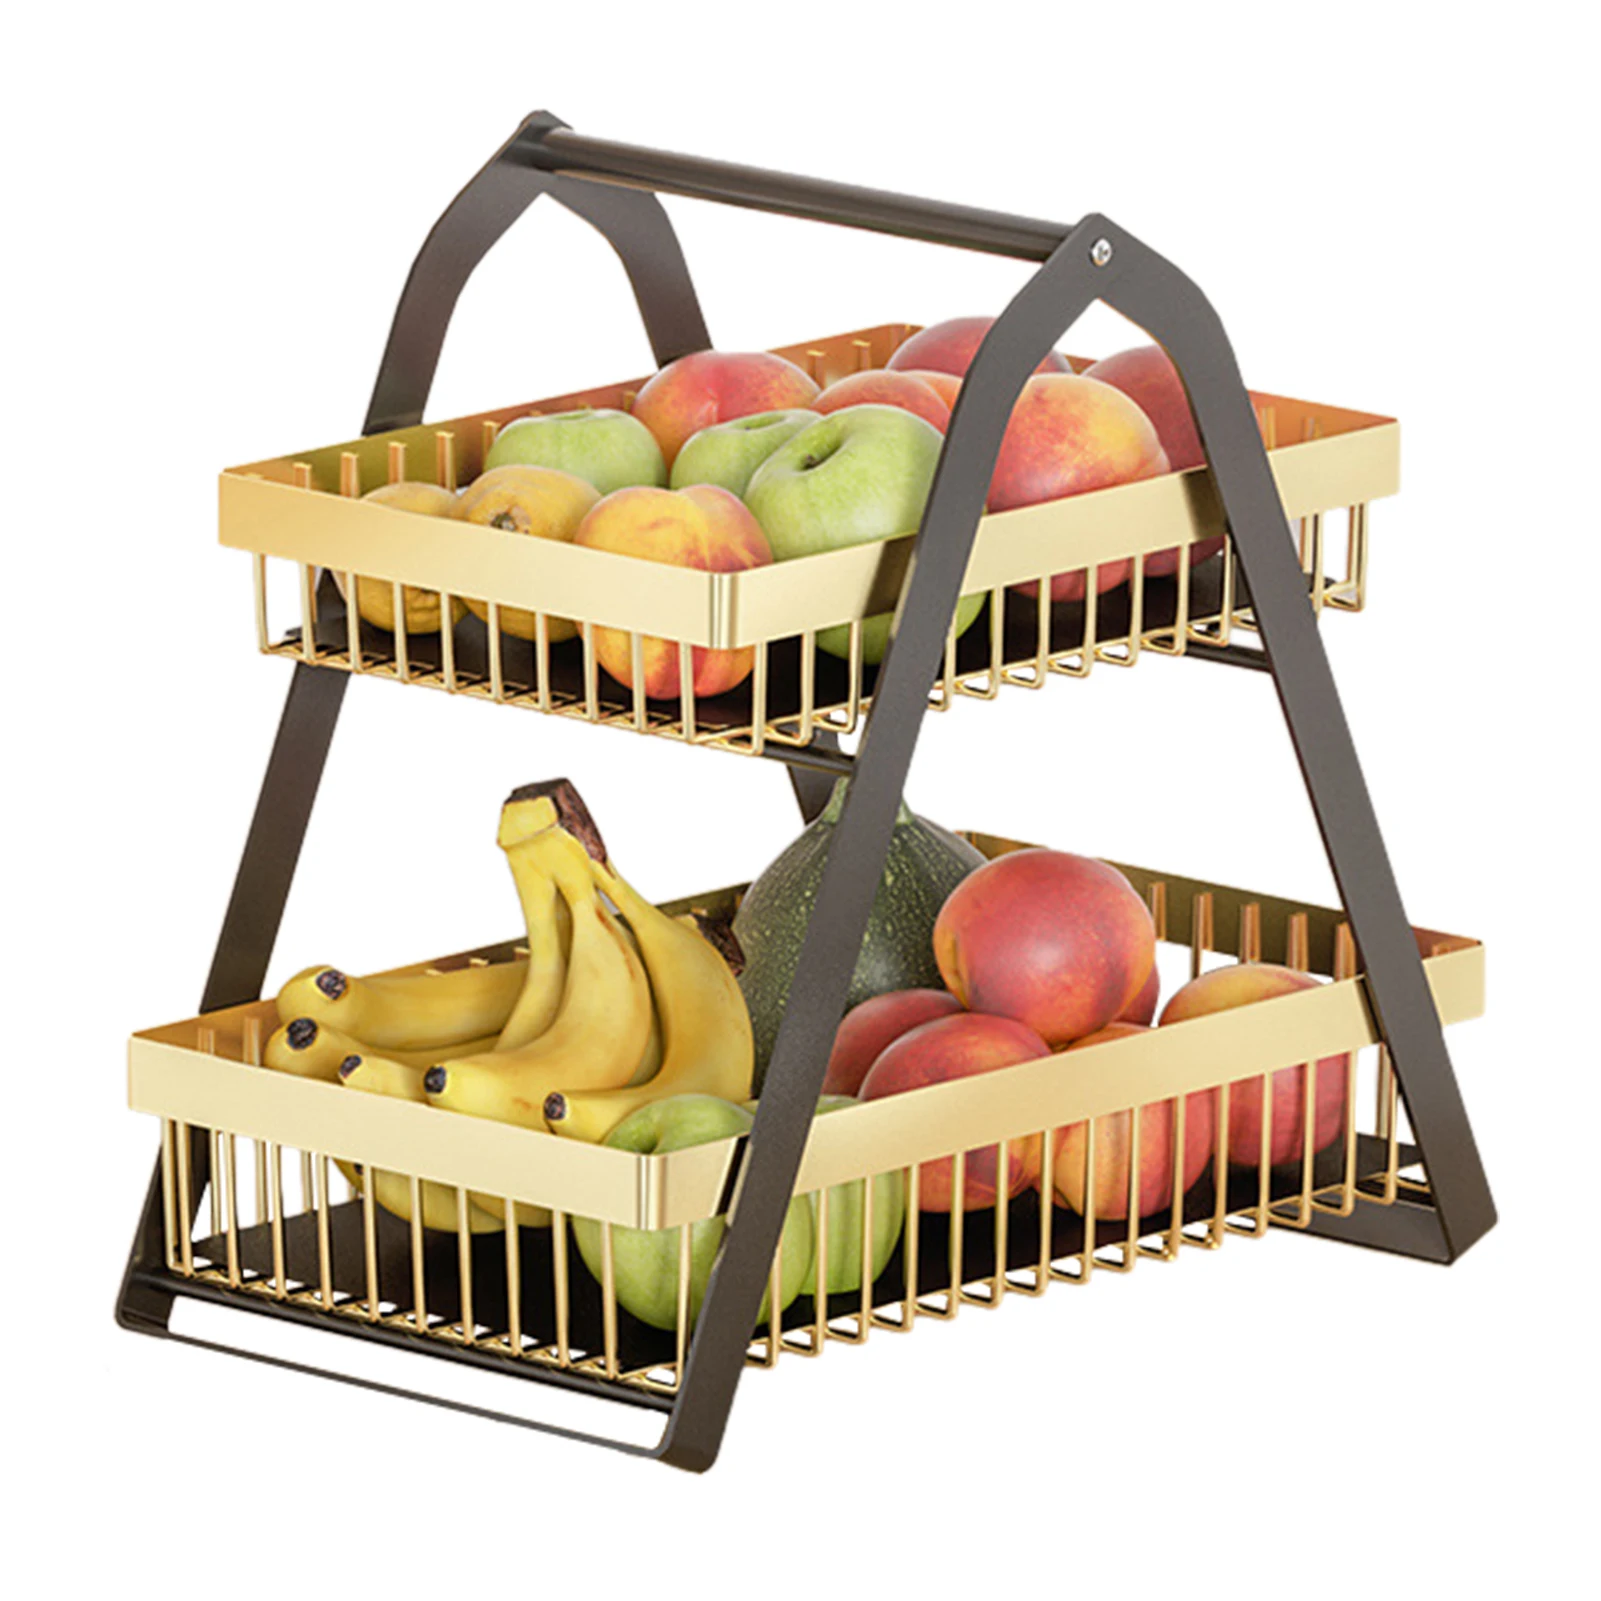 Tiered Fruits Holder Produce Bowl Stand Snack Rack for Modern Home Multifunctional Rattan Base Brownish Gold 2 Tier Fruit Vegetable and Bread Storage Baskets Organizer for Kitchen Countertop 